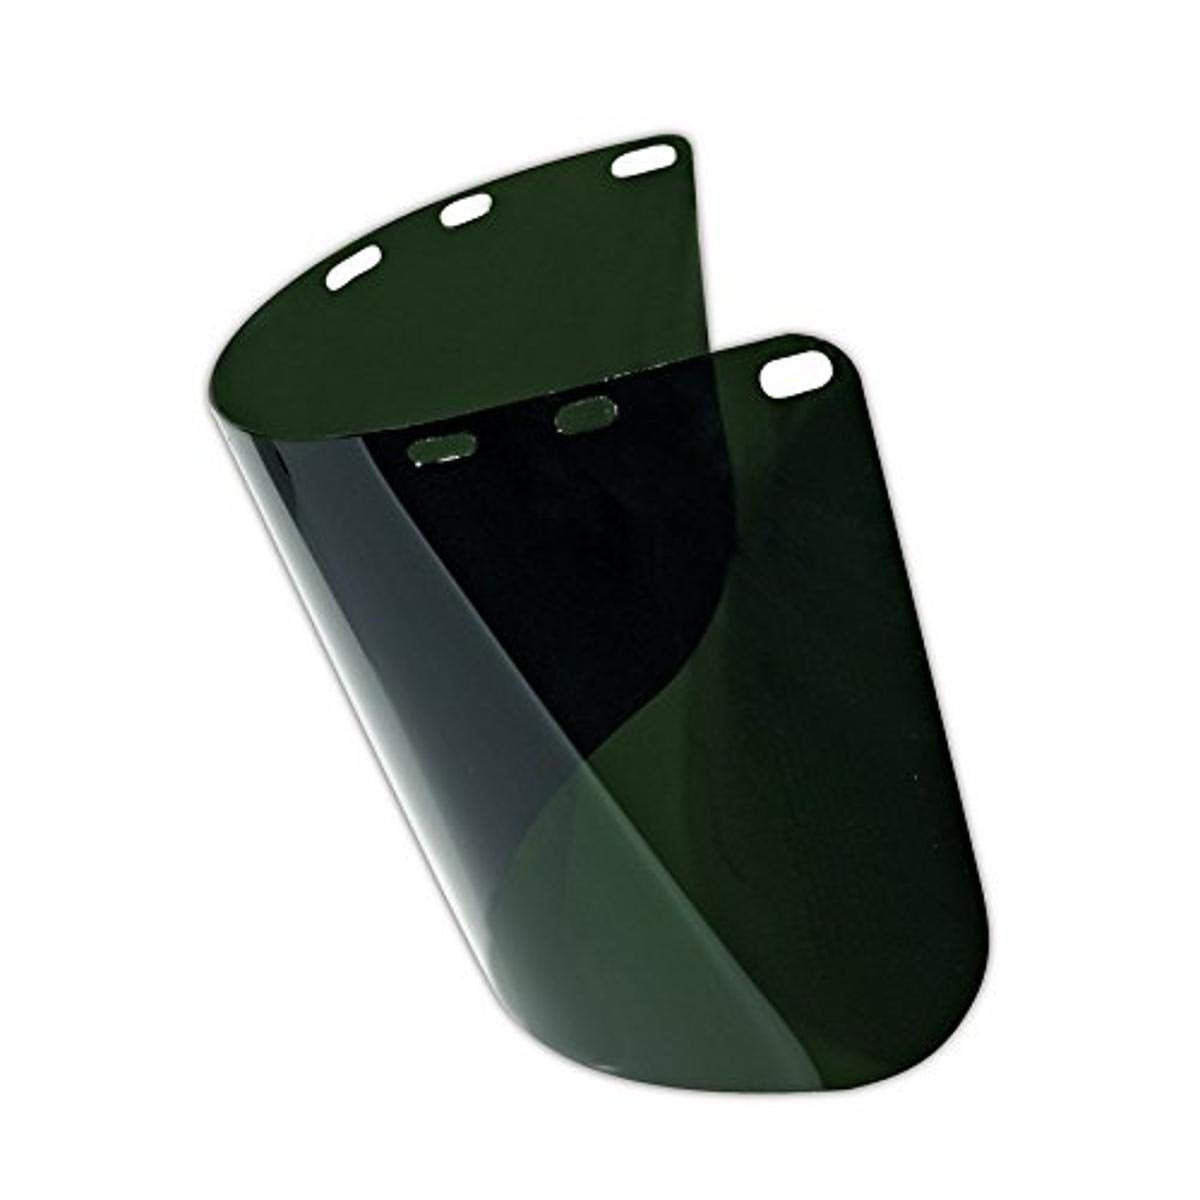 North by Honeywell A8152G/40 A8152G40 Green Polycarbonate Face Shield Window